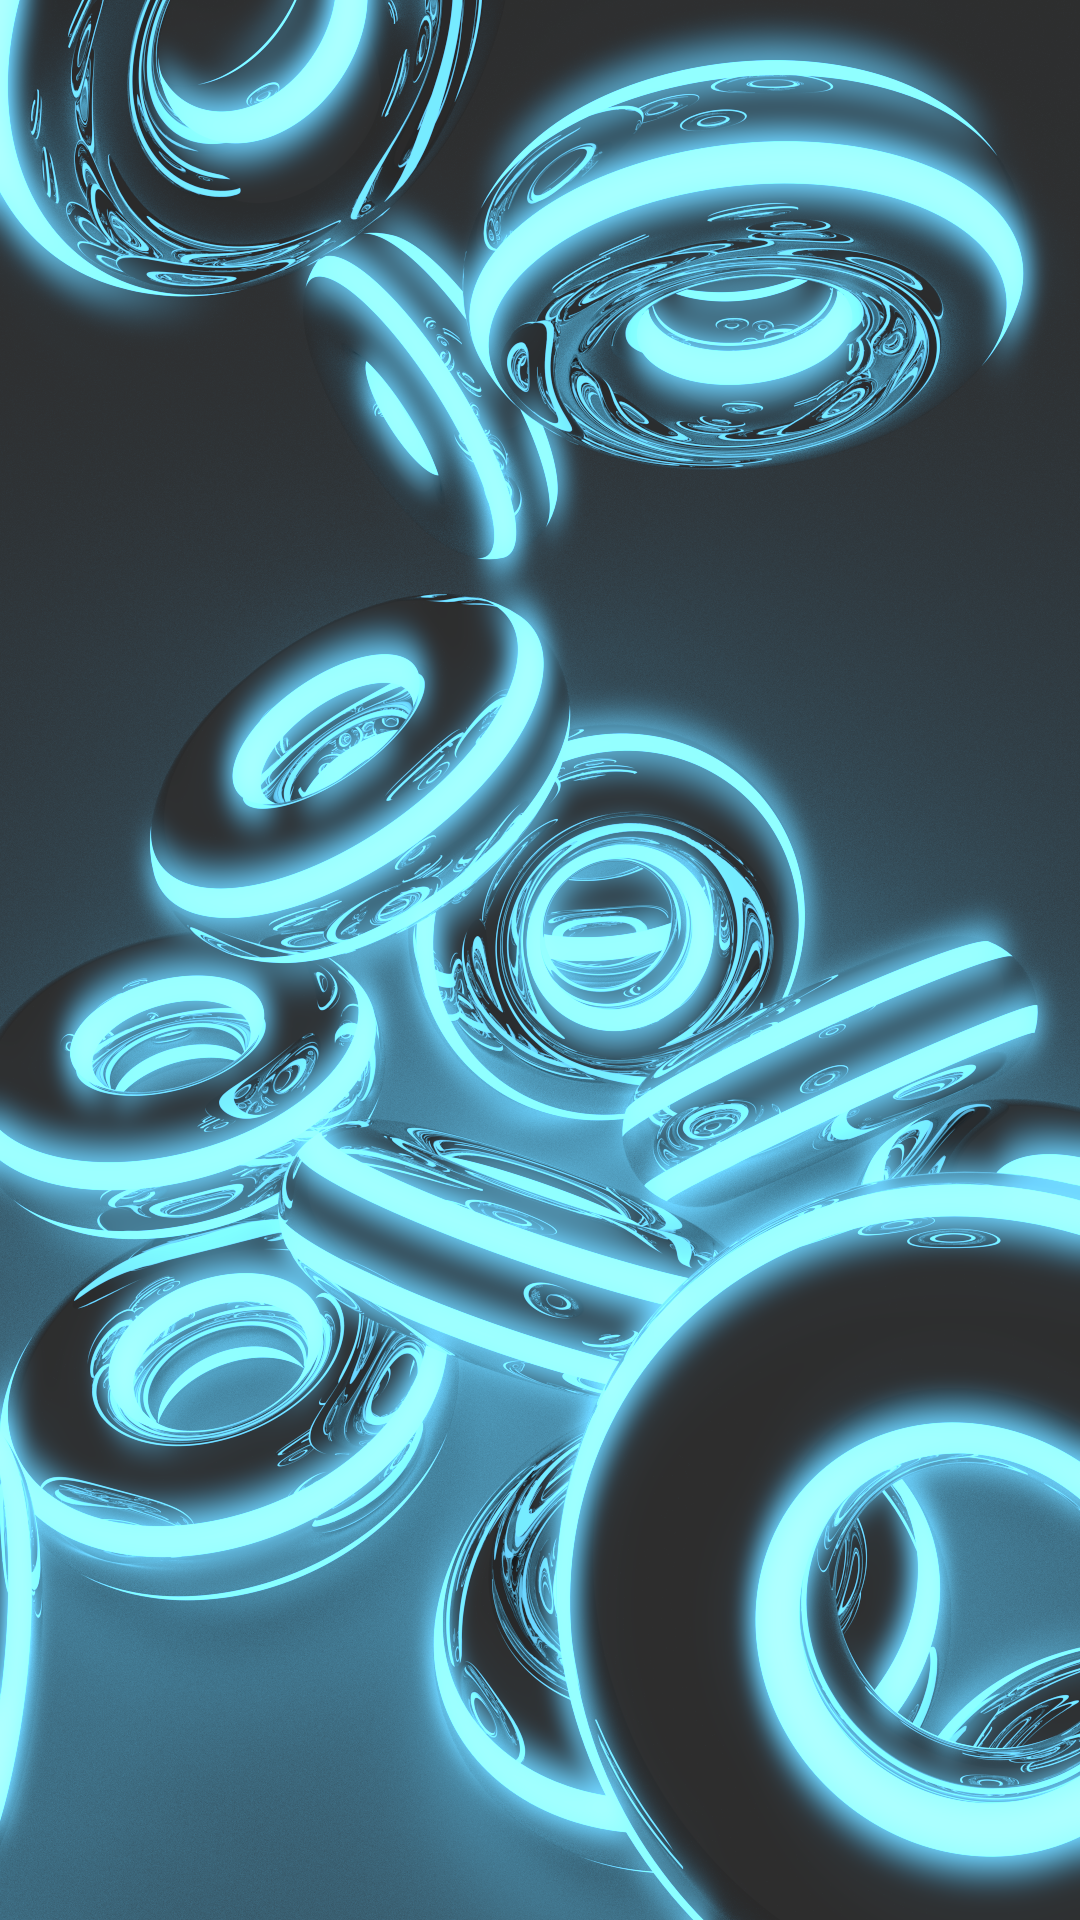 HTC Droid DNA Wallpaper Blue neon donuts Mobile Android Backgrounds